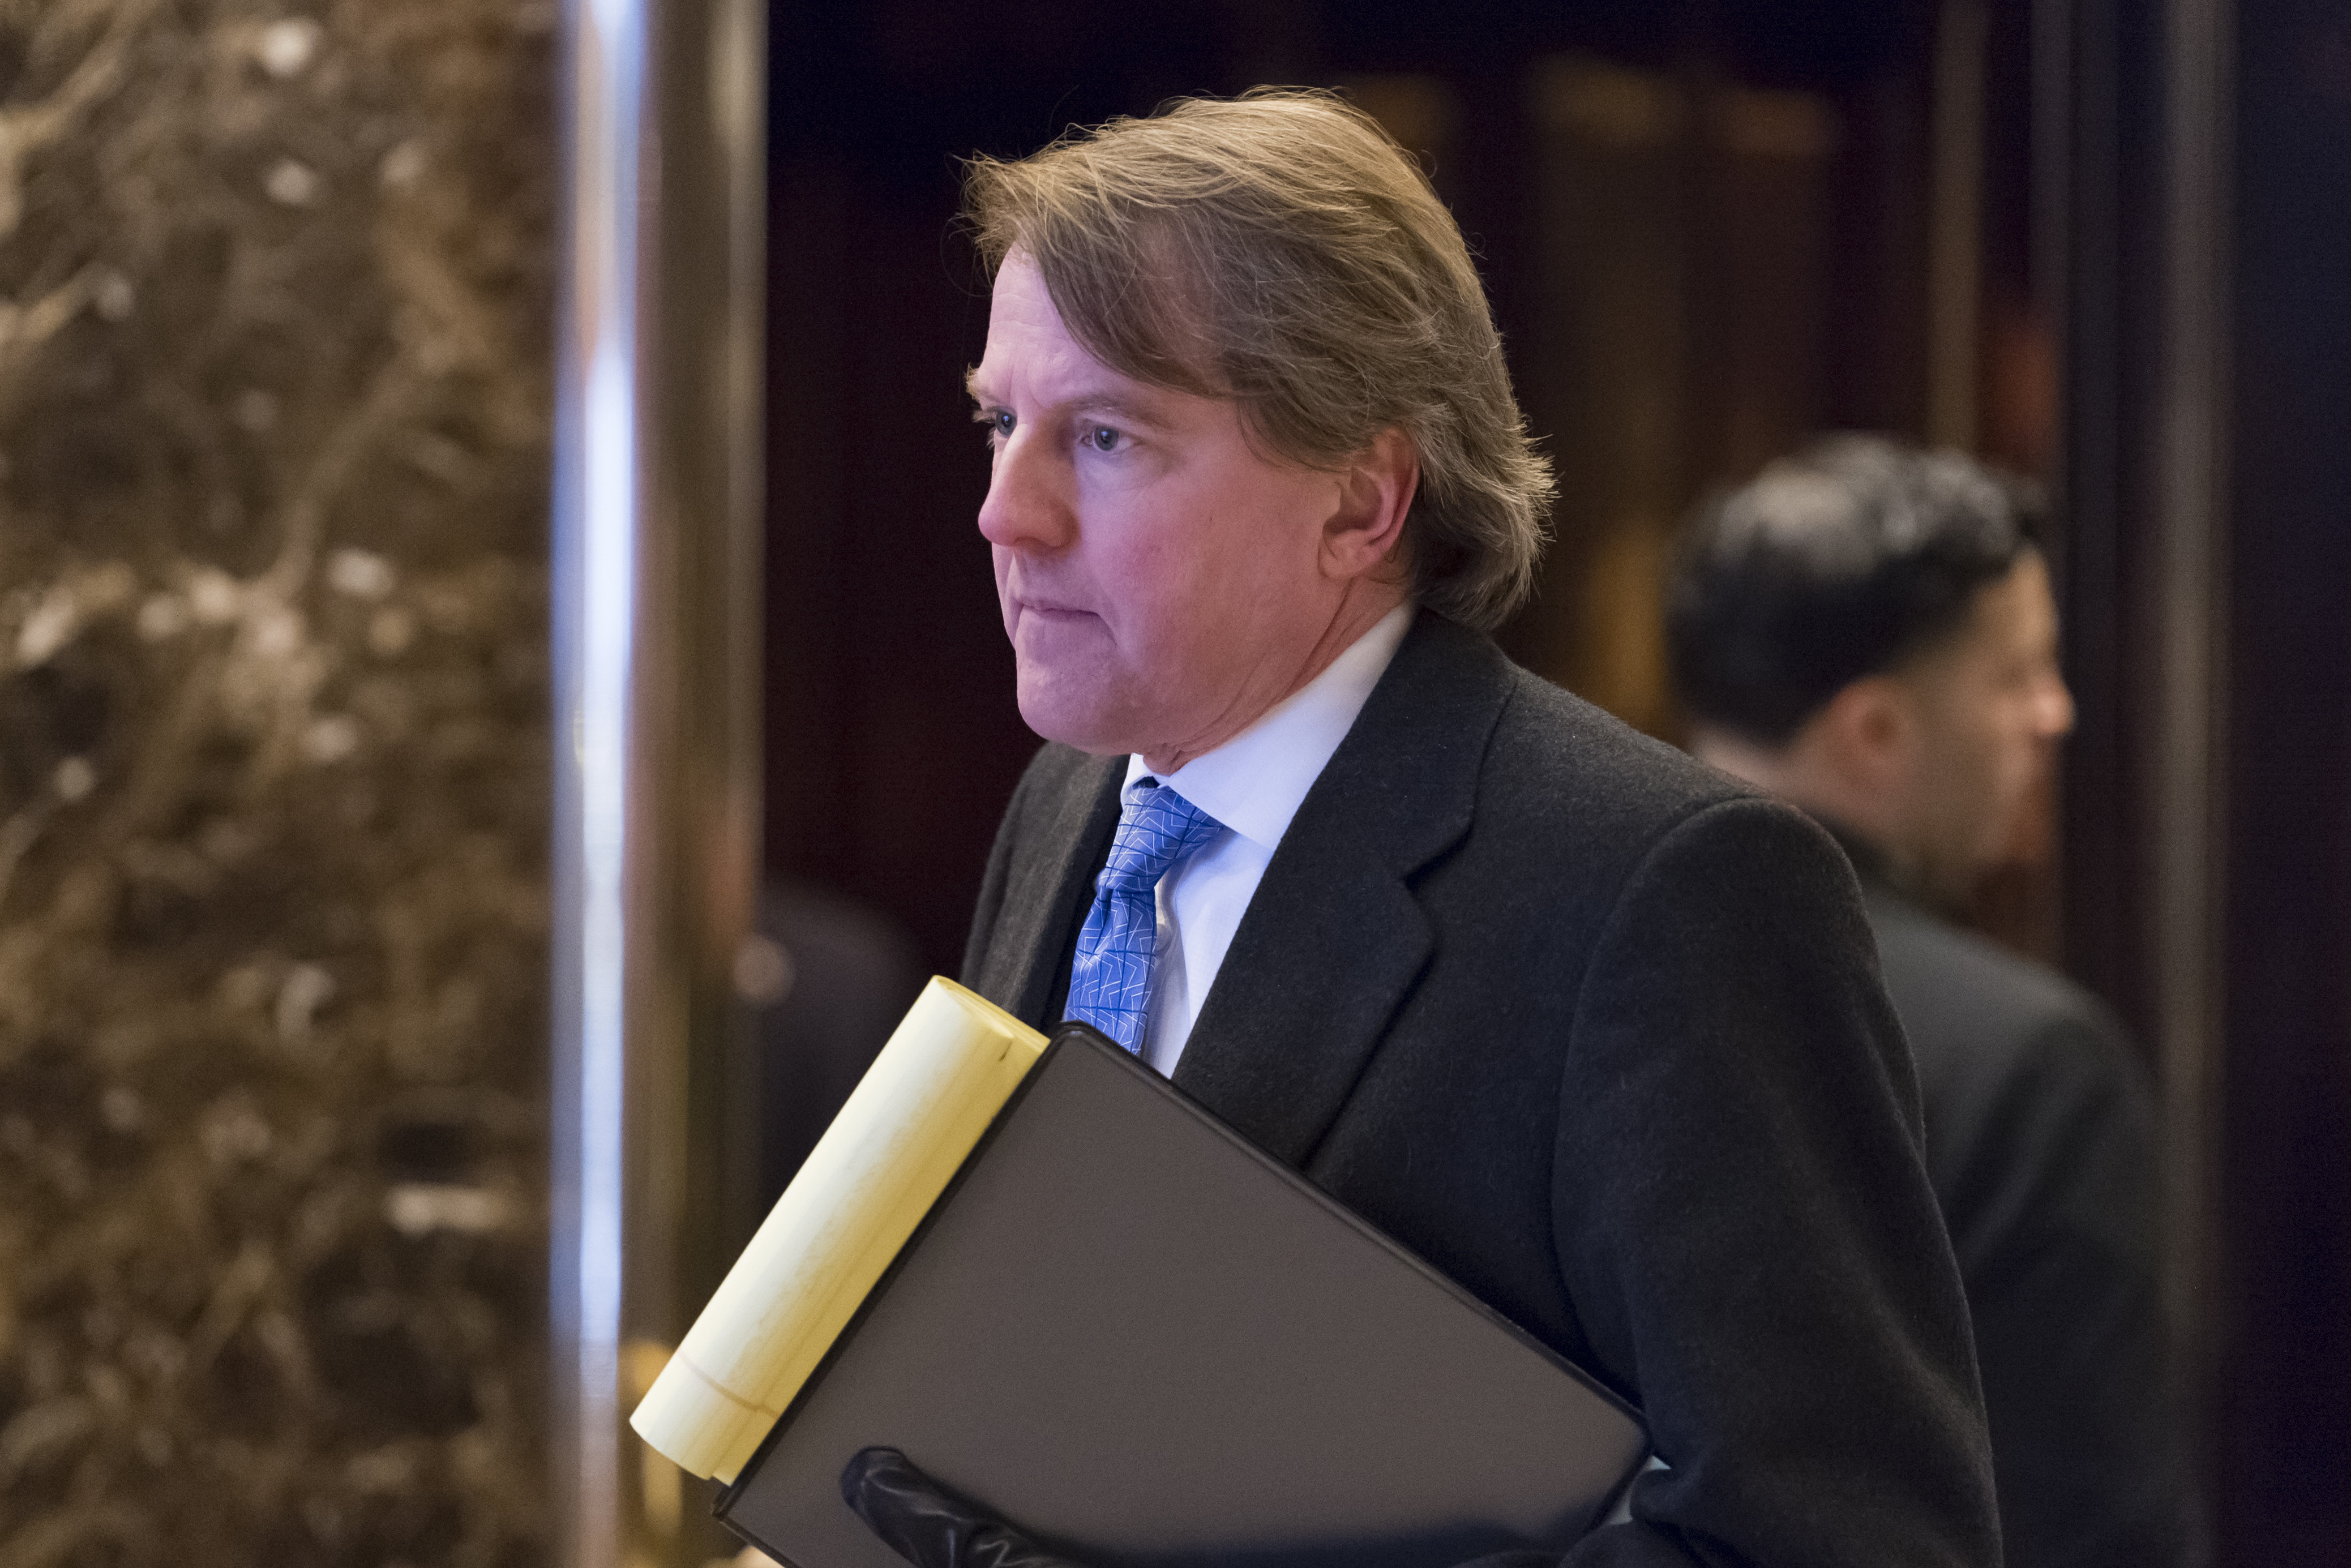 Attorney and United States Federal Election Commission member Don McGahn is seen in the lobby of Trump Tower in New York on Jan. 9, 2017. (Albin Lohr-Jones—Zuma Press) (Albin Lohr-Jones—Zuma Press))